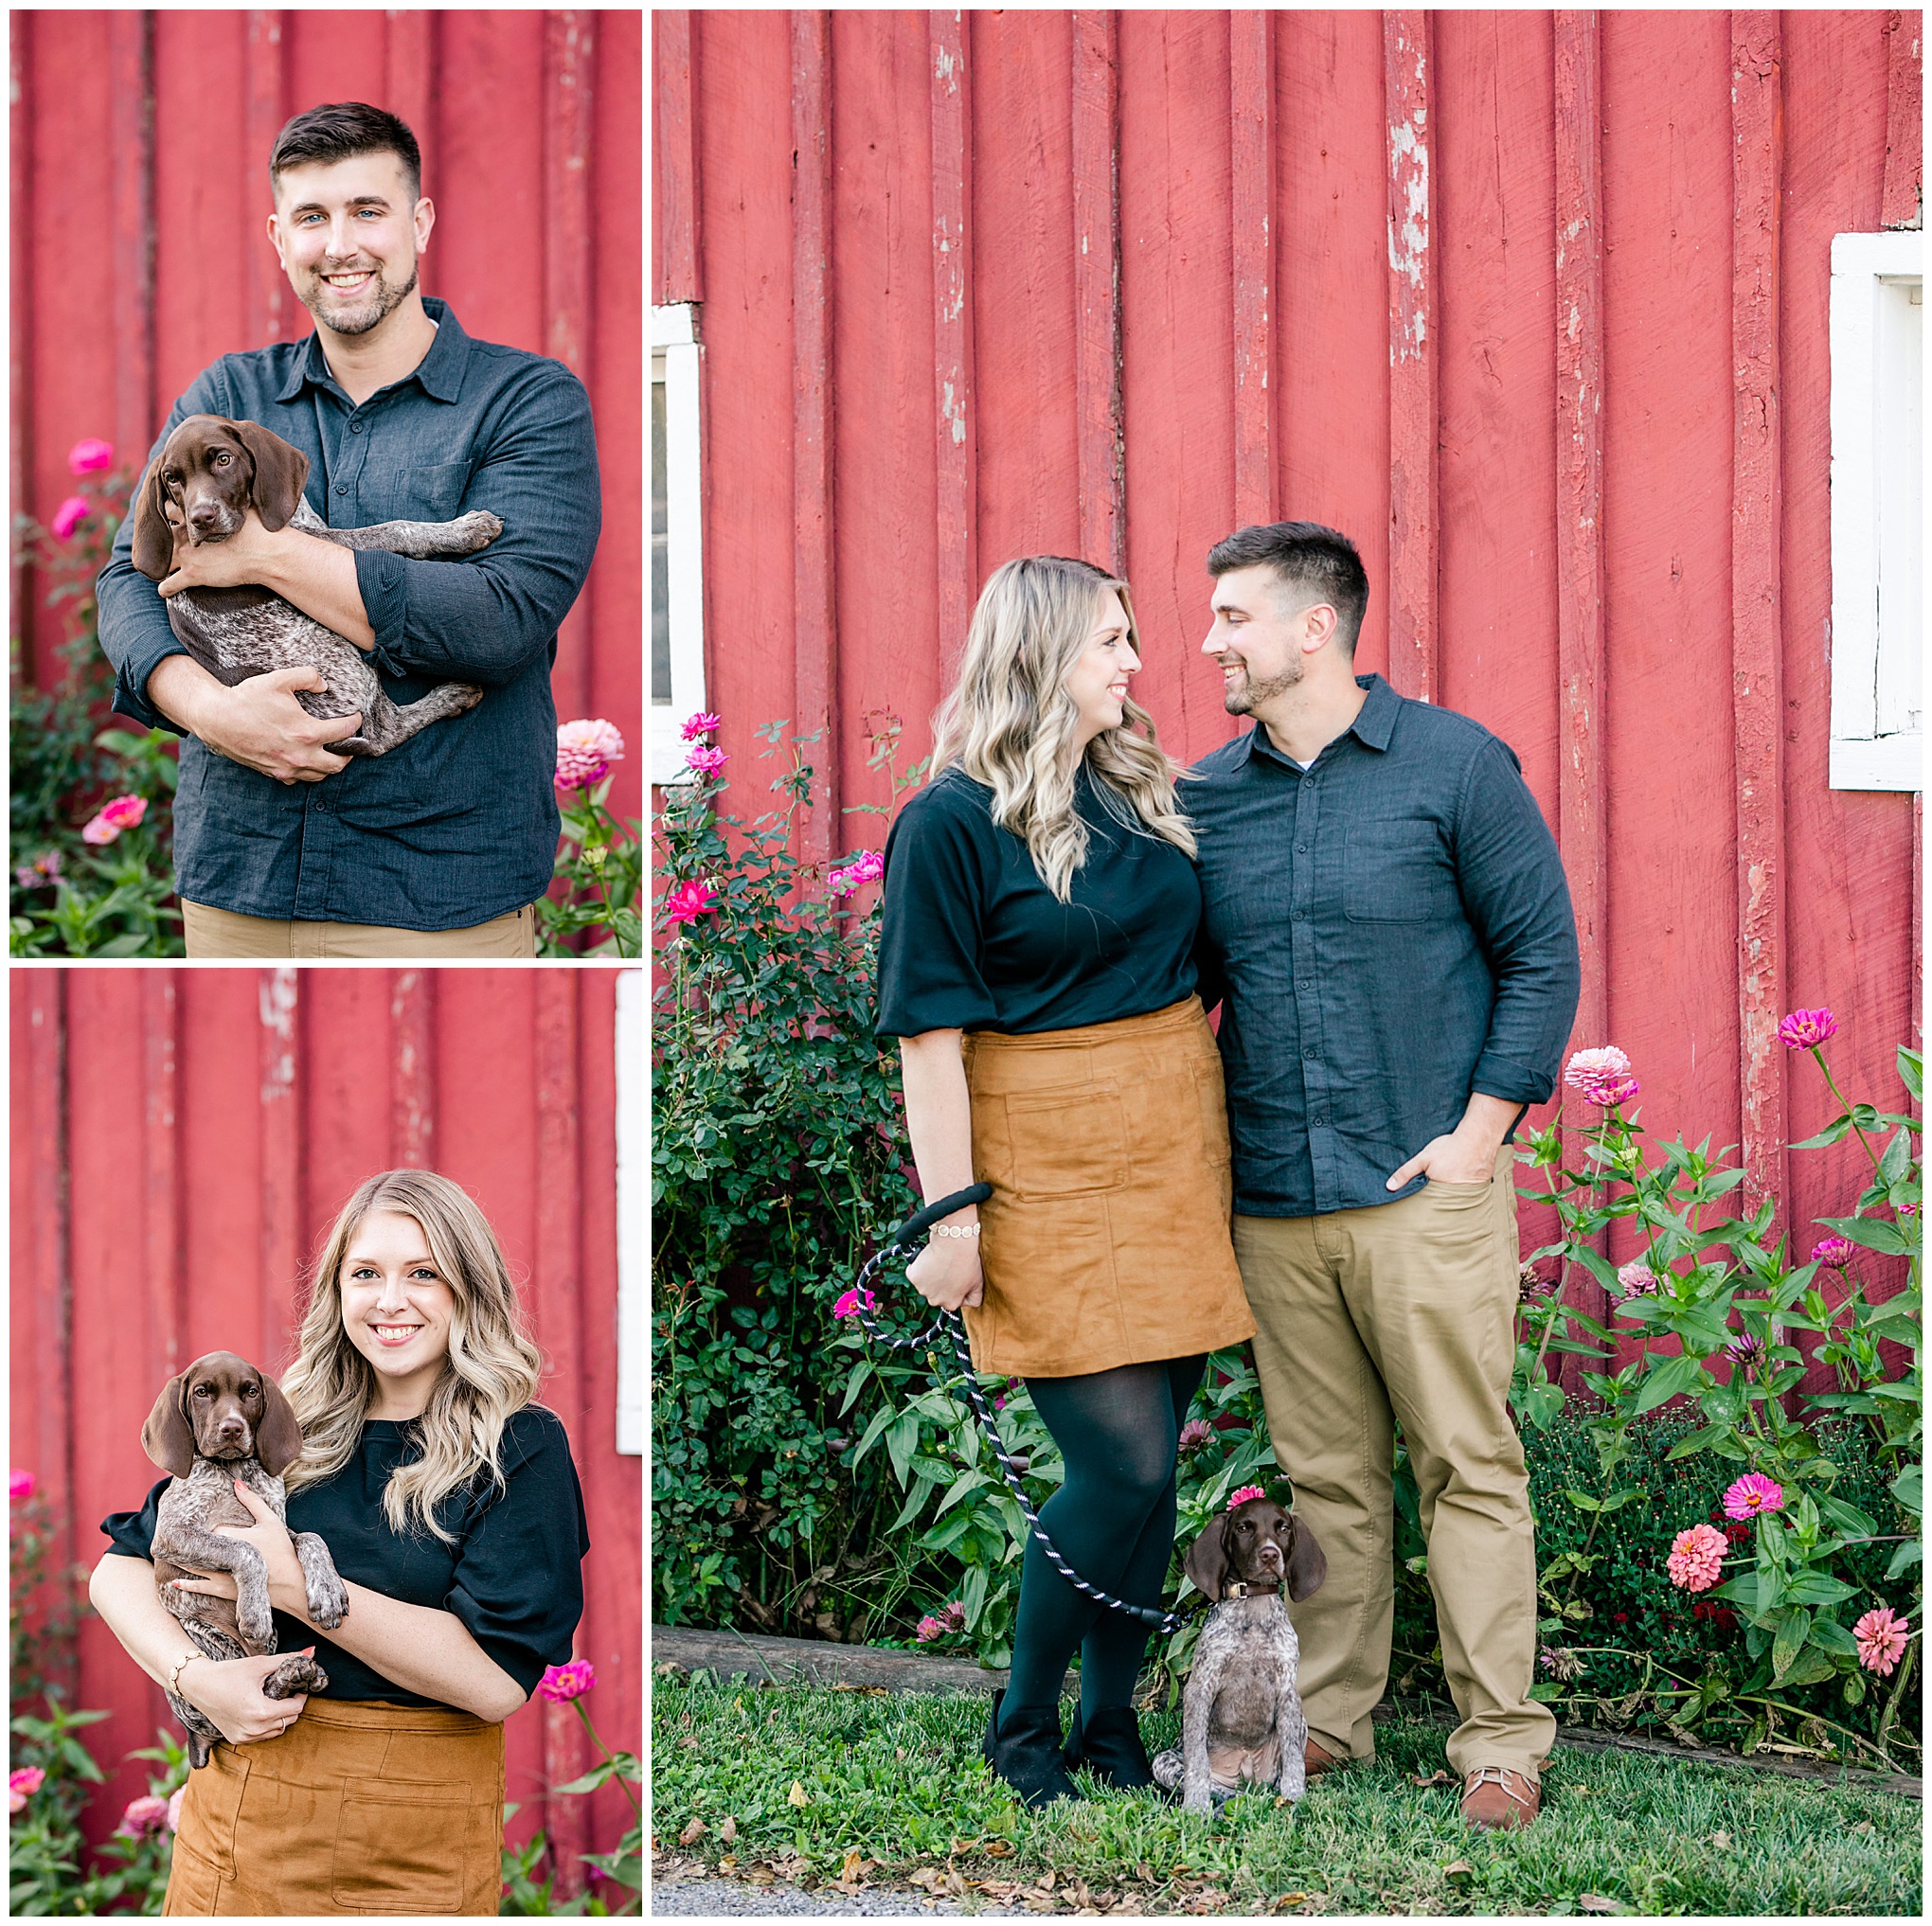 Willowcroft Farm Vineyard surprise proposal, Virginia winery proposal, Leesburg Virginia photographer, Leesburg surprise proposal, Leesburg winery, autumn portraits, outdoor proposal, DC proposal photographer, Leesburg photographer, engaged couple, romantic portraits, Rachel E.H. Photography, German shorthaired pointer, adorable puppy